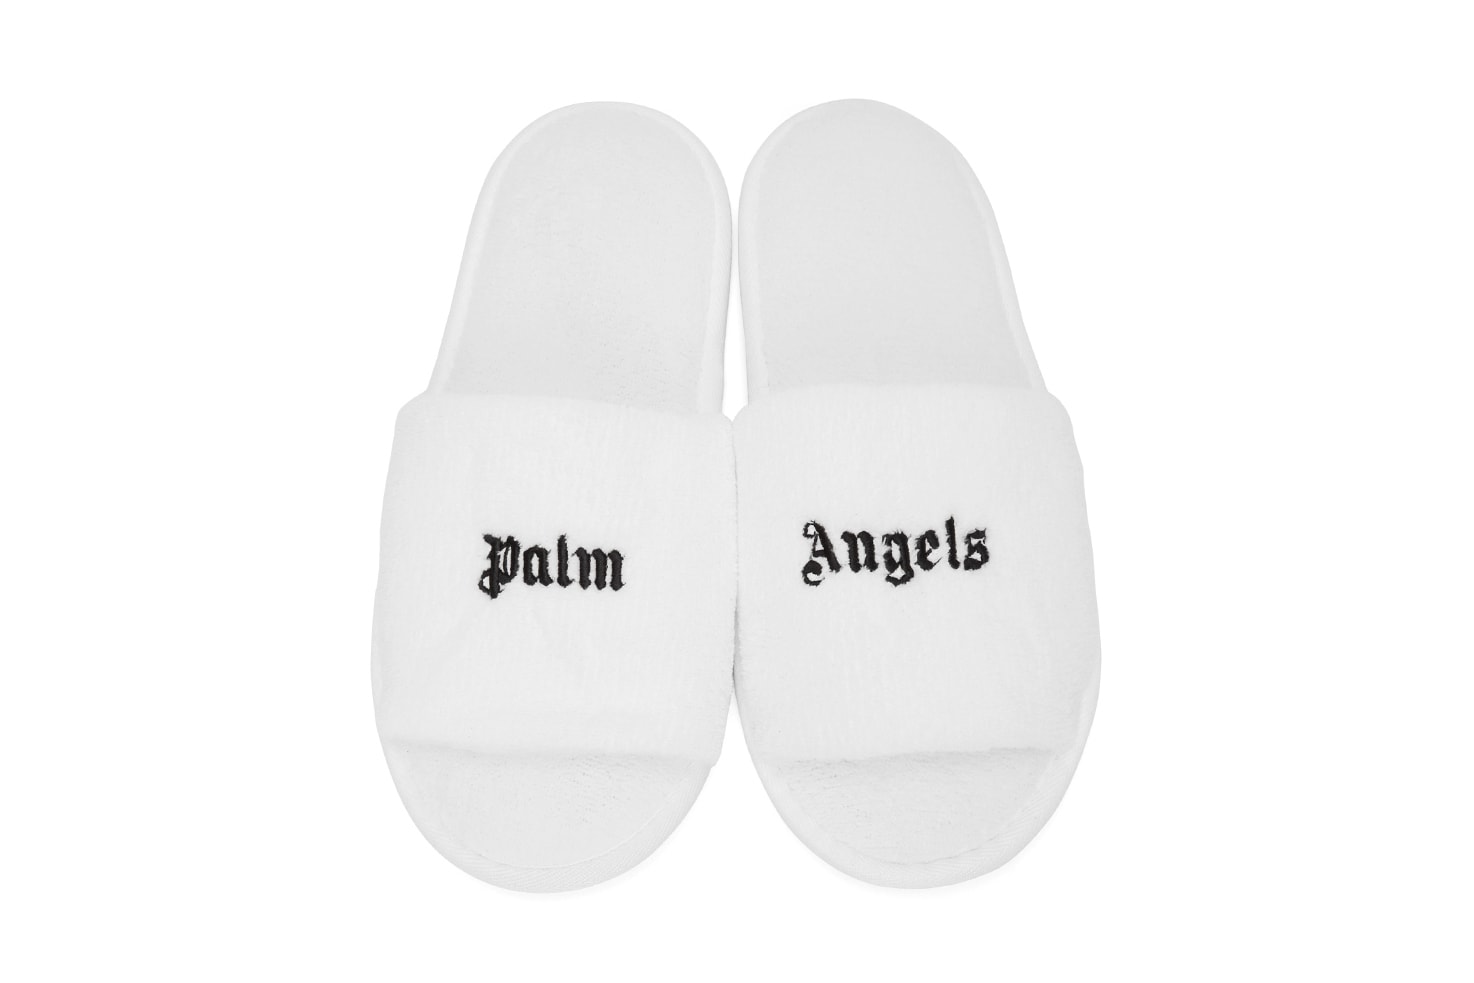 Palm Angels Logo Hotel Slippers Cotton-Blend Shoes 